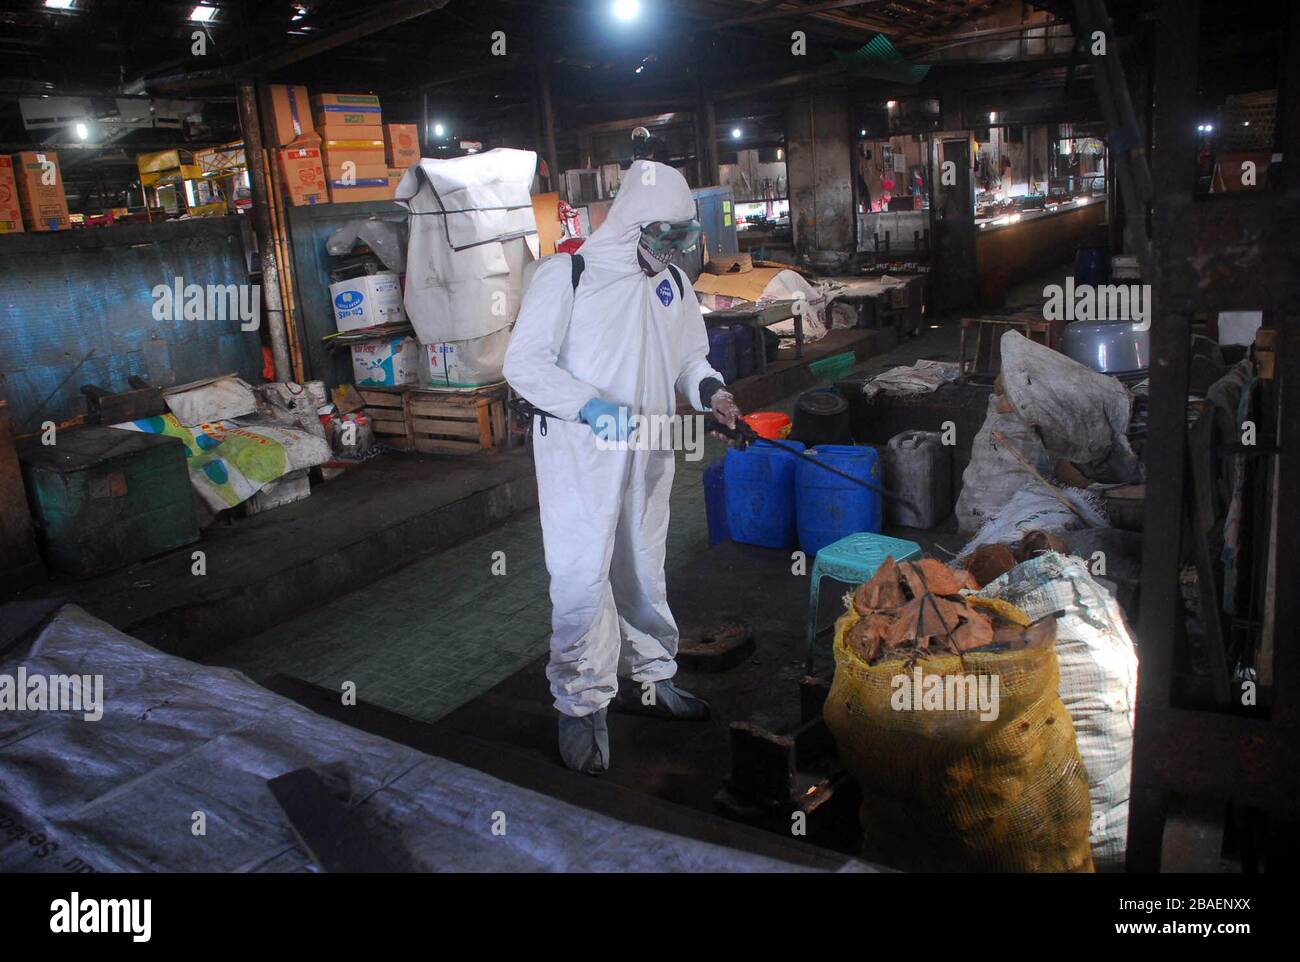 Yogyakarta, Indonesia. 27th Mar, 2020. A worker conducts disinfection at a market in Yogyakarta, Indonesia, March 27, 2020. The Indonesian government said the death toll of COVID-19 in the country climbed to 87 on Friday, the highest in Southeast Asia. Meanwhile, the number of confirmed cases jumped to 1,046 from 893 in 24 hours. Credit: Juli Nugroho/Xinhua/Alamy Live News Stock Photo